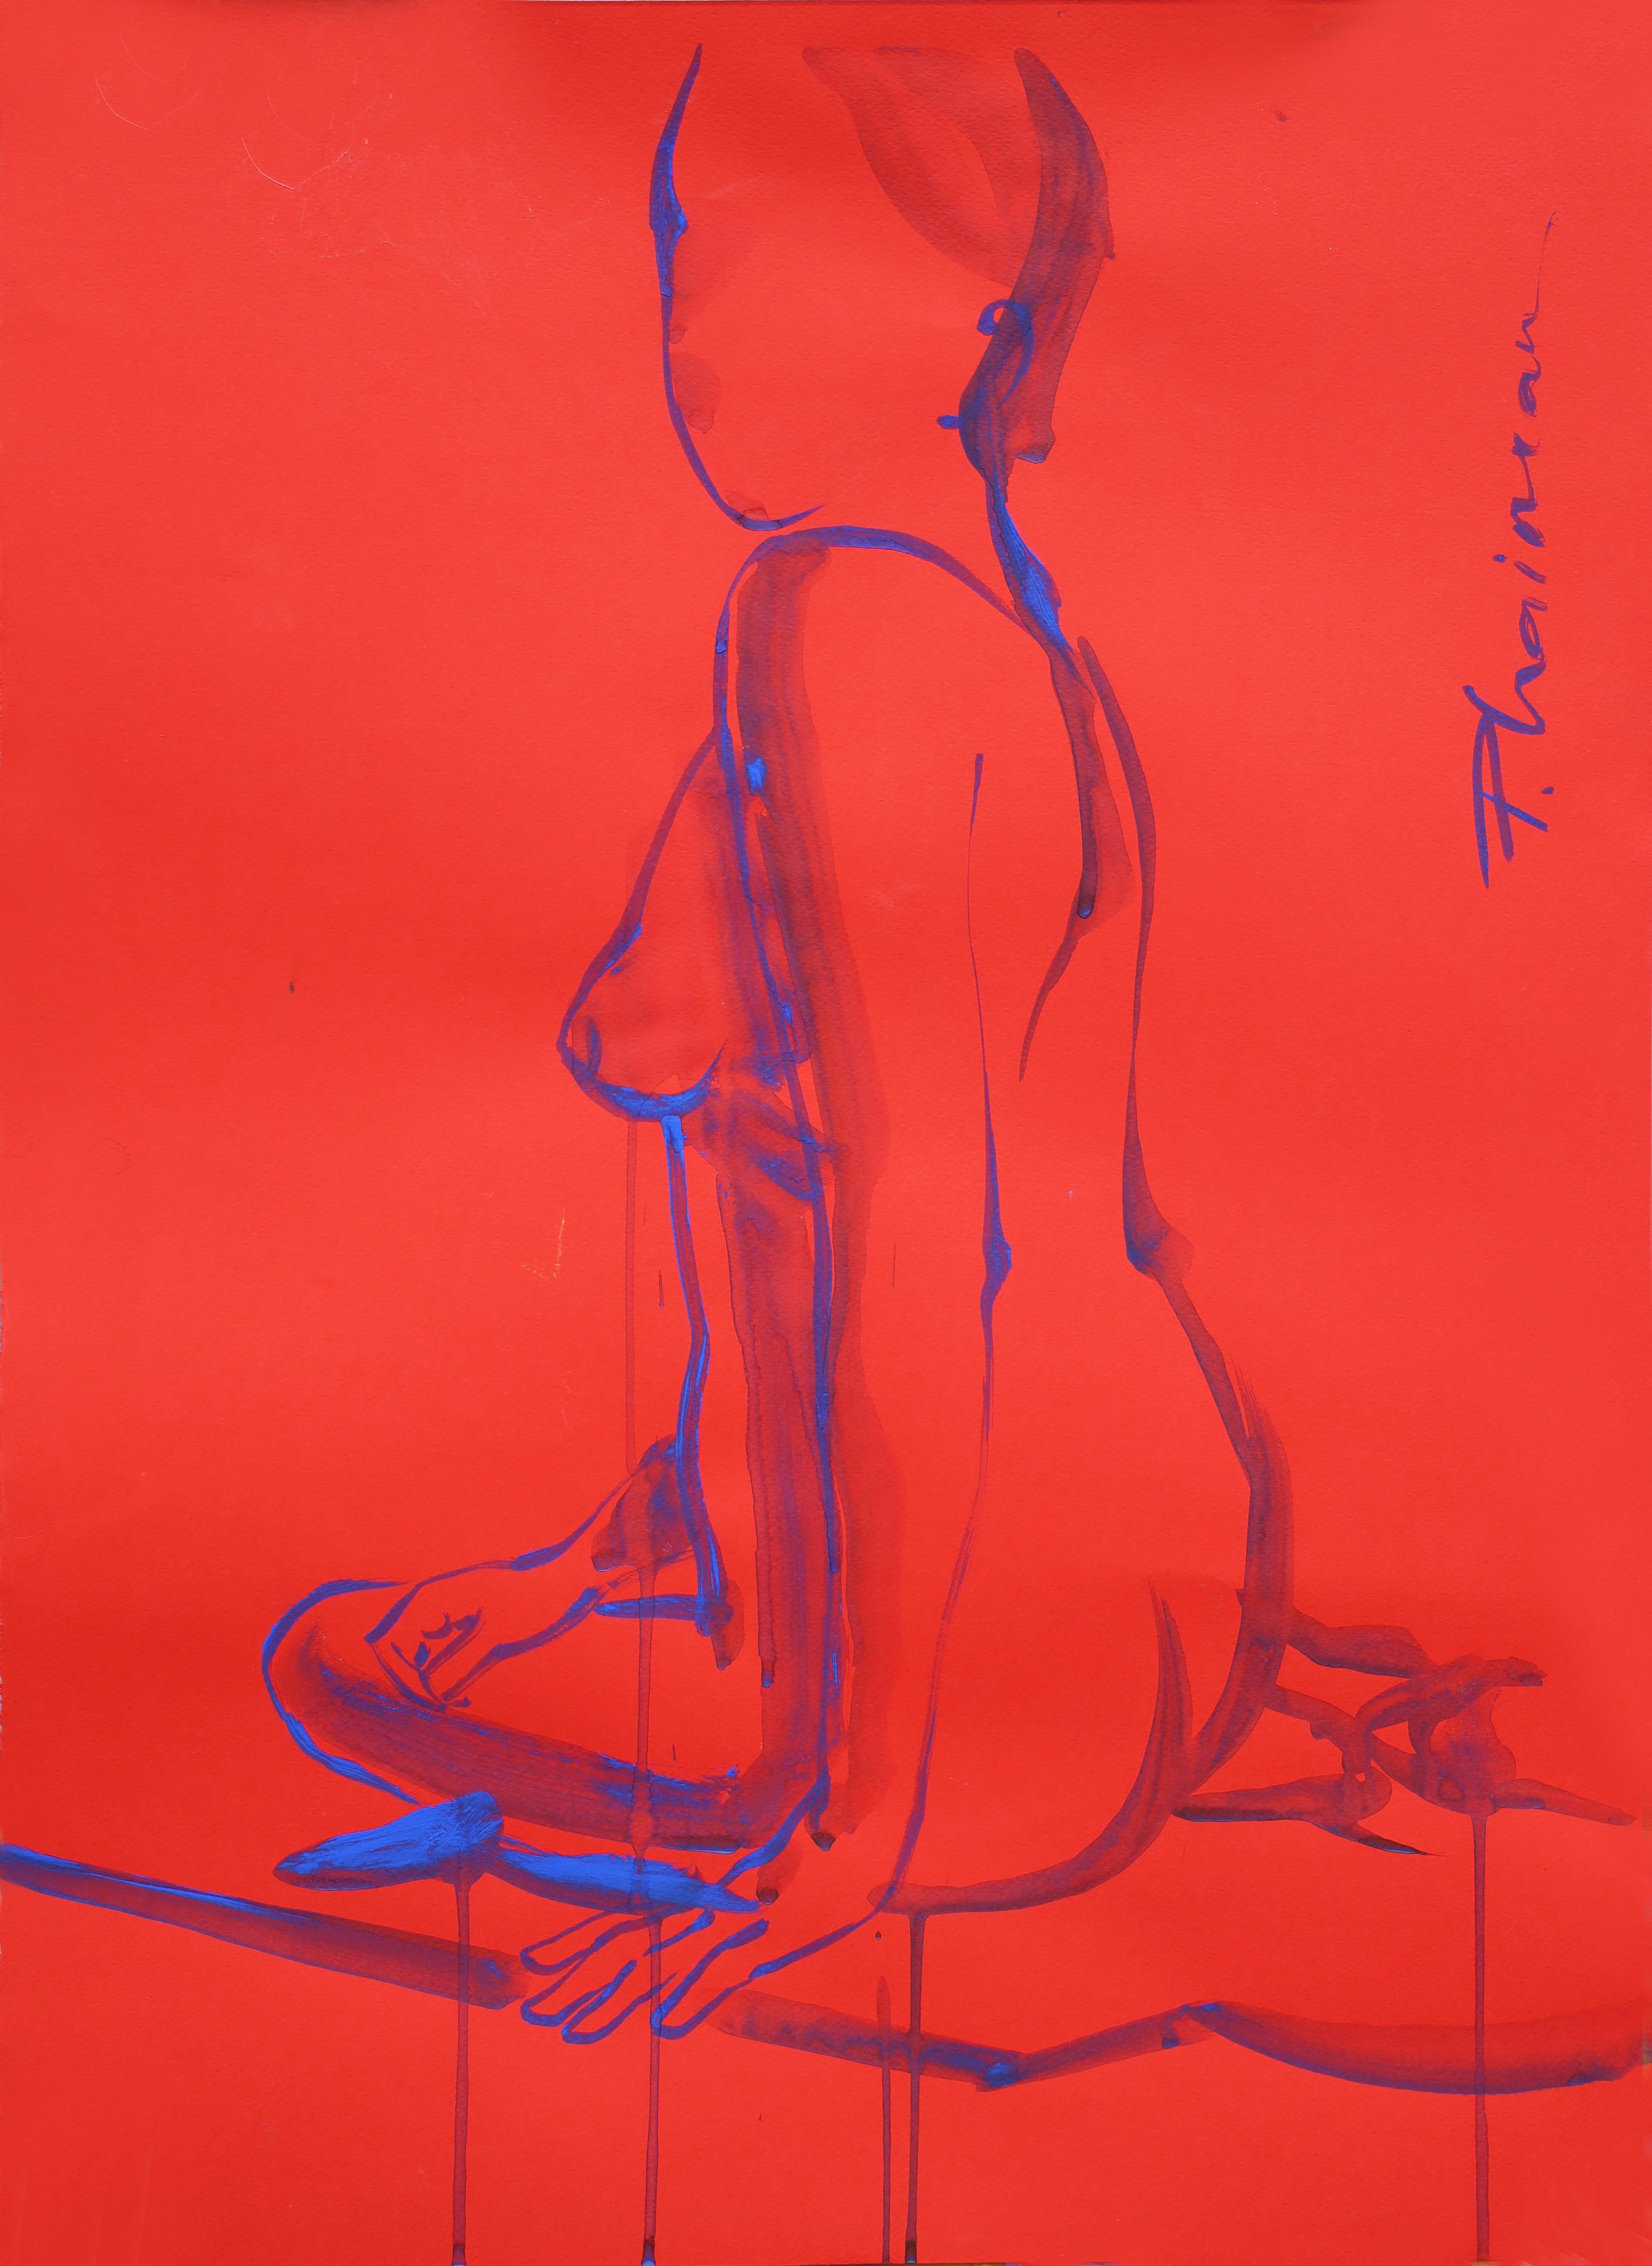 Modern Venus
Part of "Nude in Interior" series.
Original work on colored paper, with blue ultramarine tempera, inspired by Matisse.  Size 2is 7.5x19.5in / 70x50cm . Shipped rolled in a tube.

Get free shipping with 1stdibs code.


